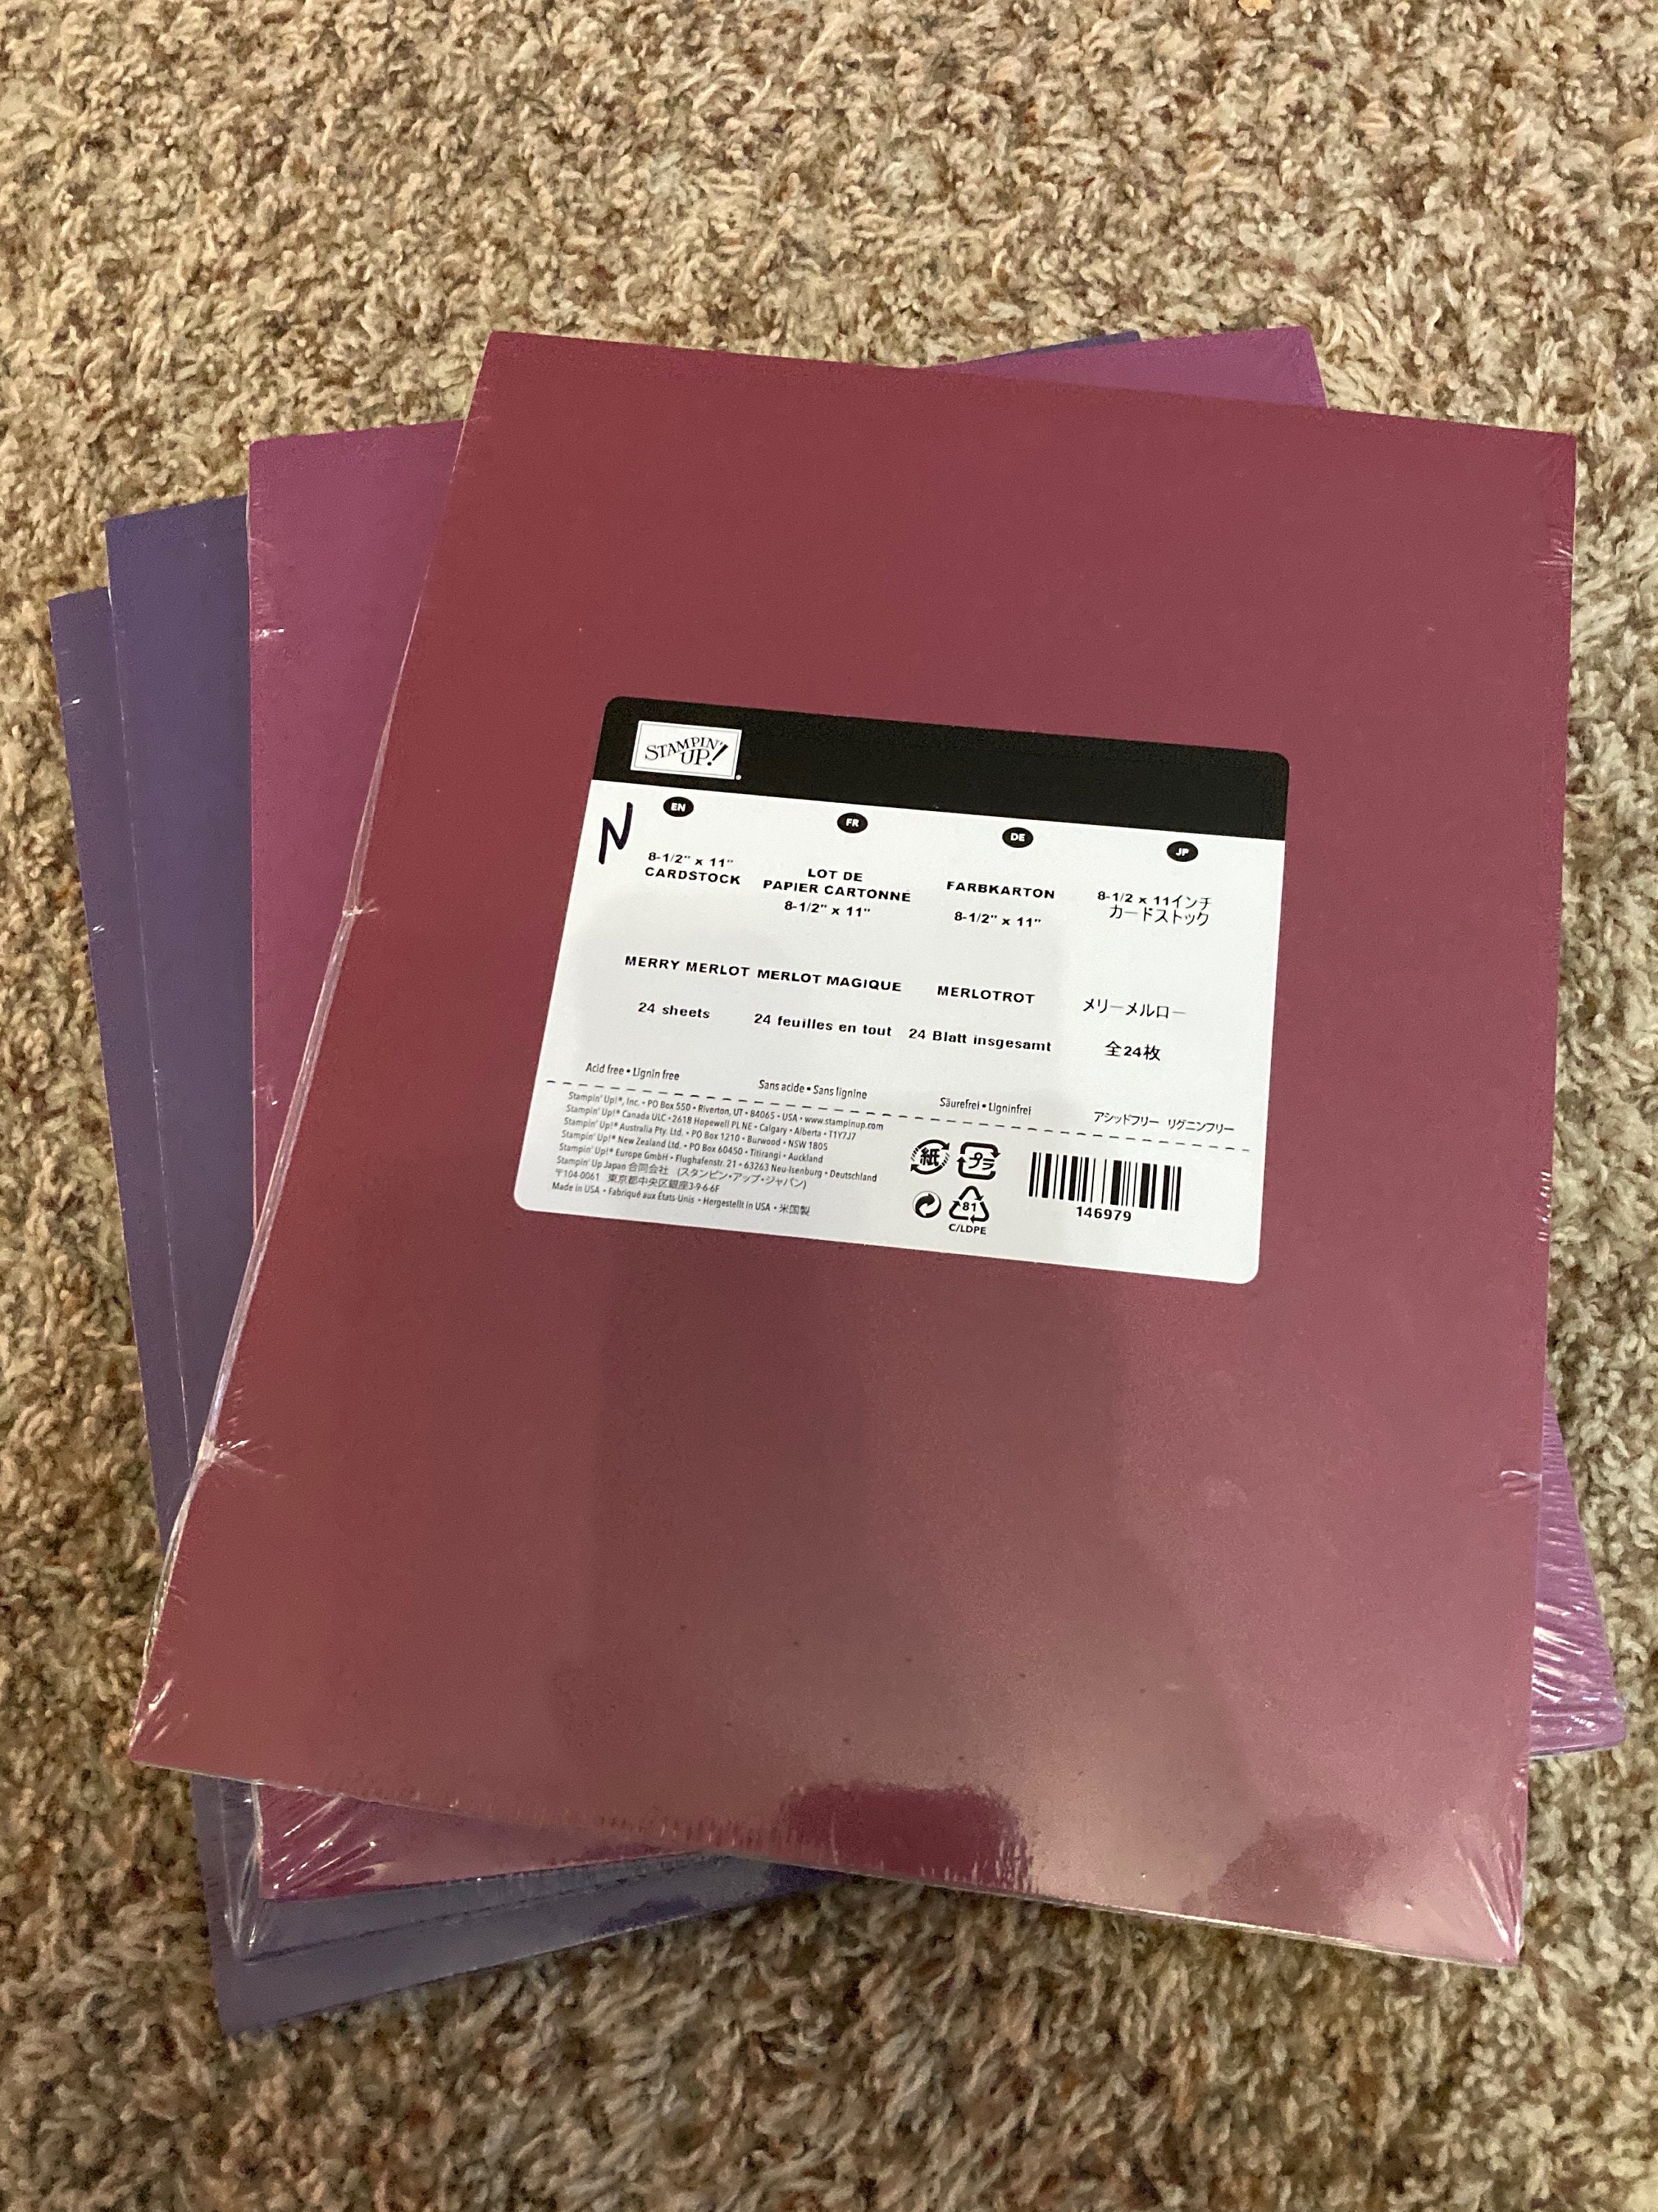 Premium Cardstock Paper 65 Lb 8.5 X 11 In. Perfect for Scrapbooking,  Cardmaking, & More Pick Color and Quantity 